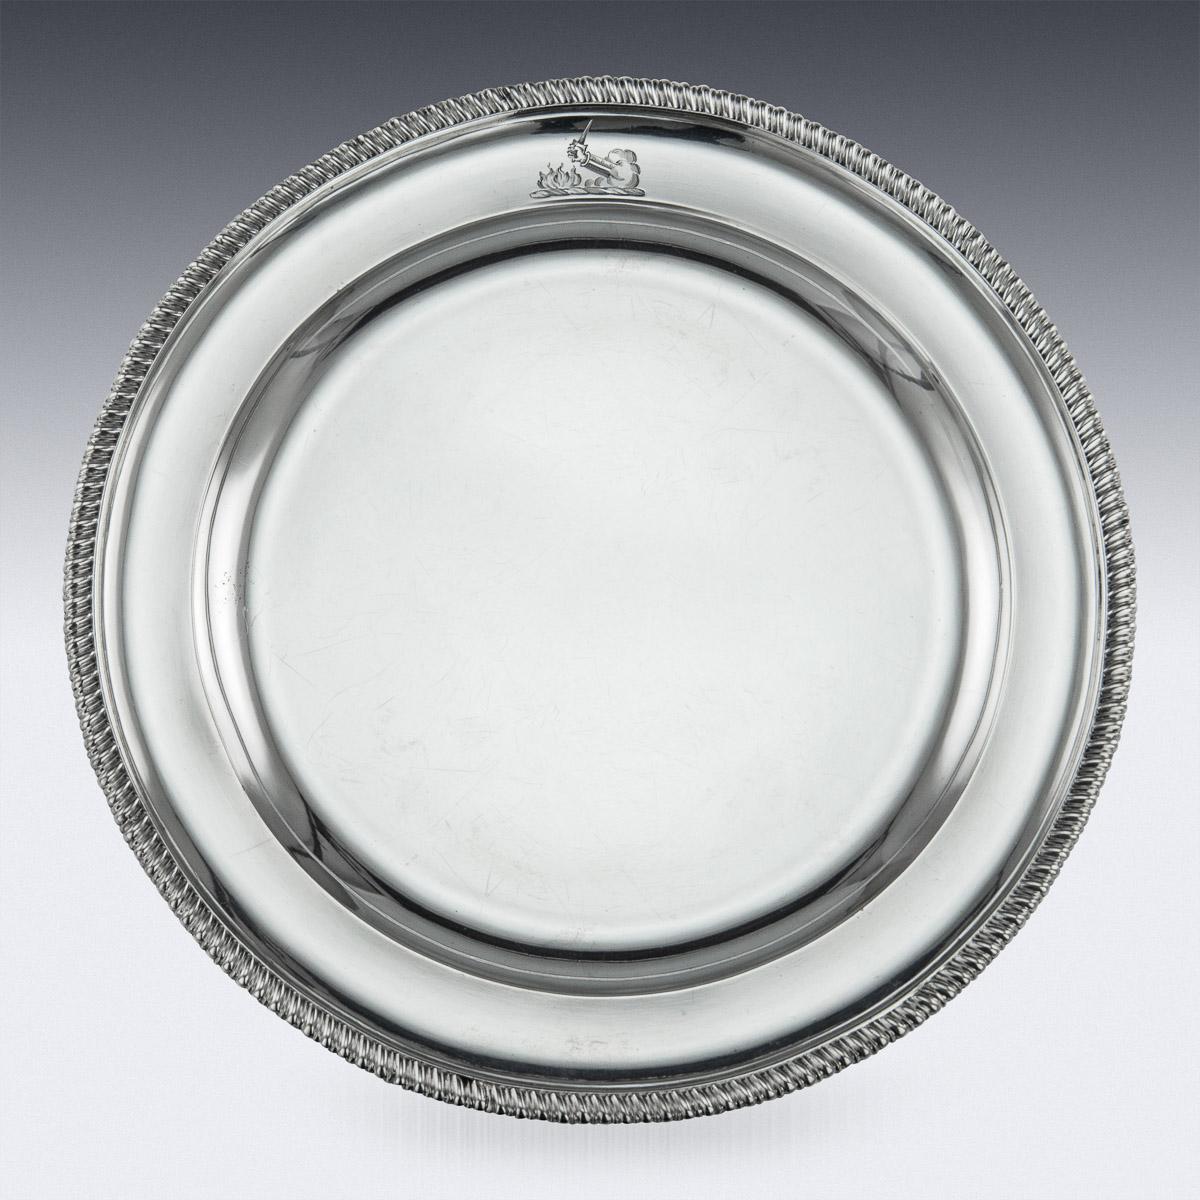 Antique mid-19th century Victorian important solid silver set of twelve dinner plates, each of shaped-circular form with gadrooned borders. Each border is engraved with a family crest of Sir Glynne Earle Welby-Gregory 3rd Baronet. (1806-1875), who